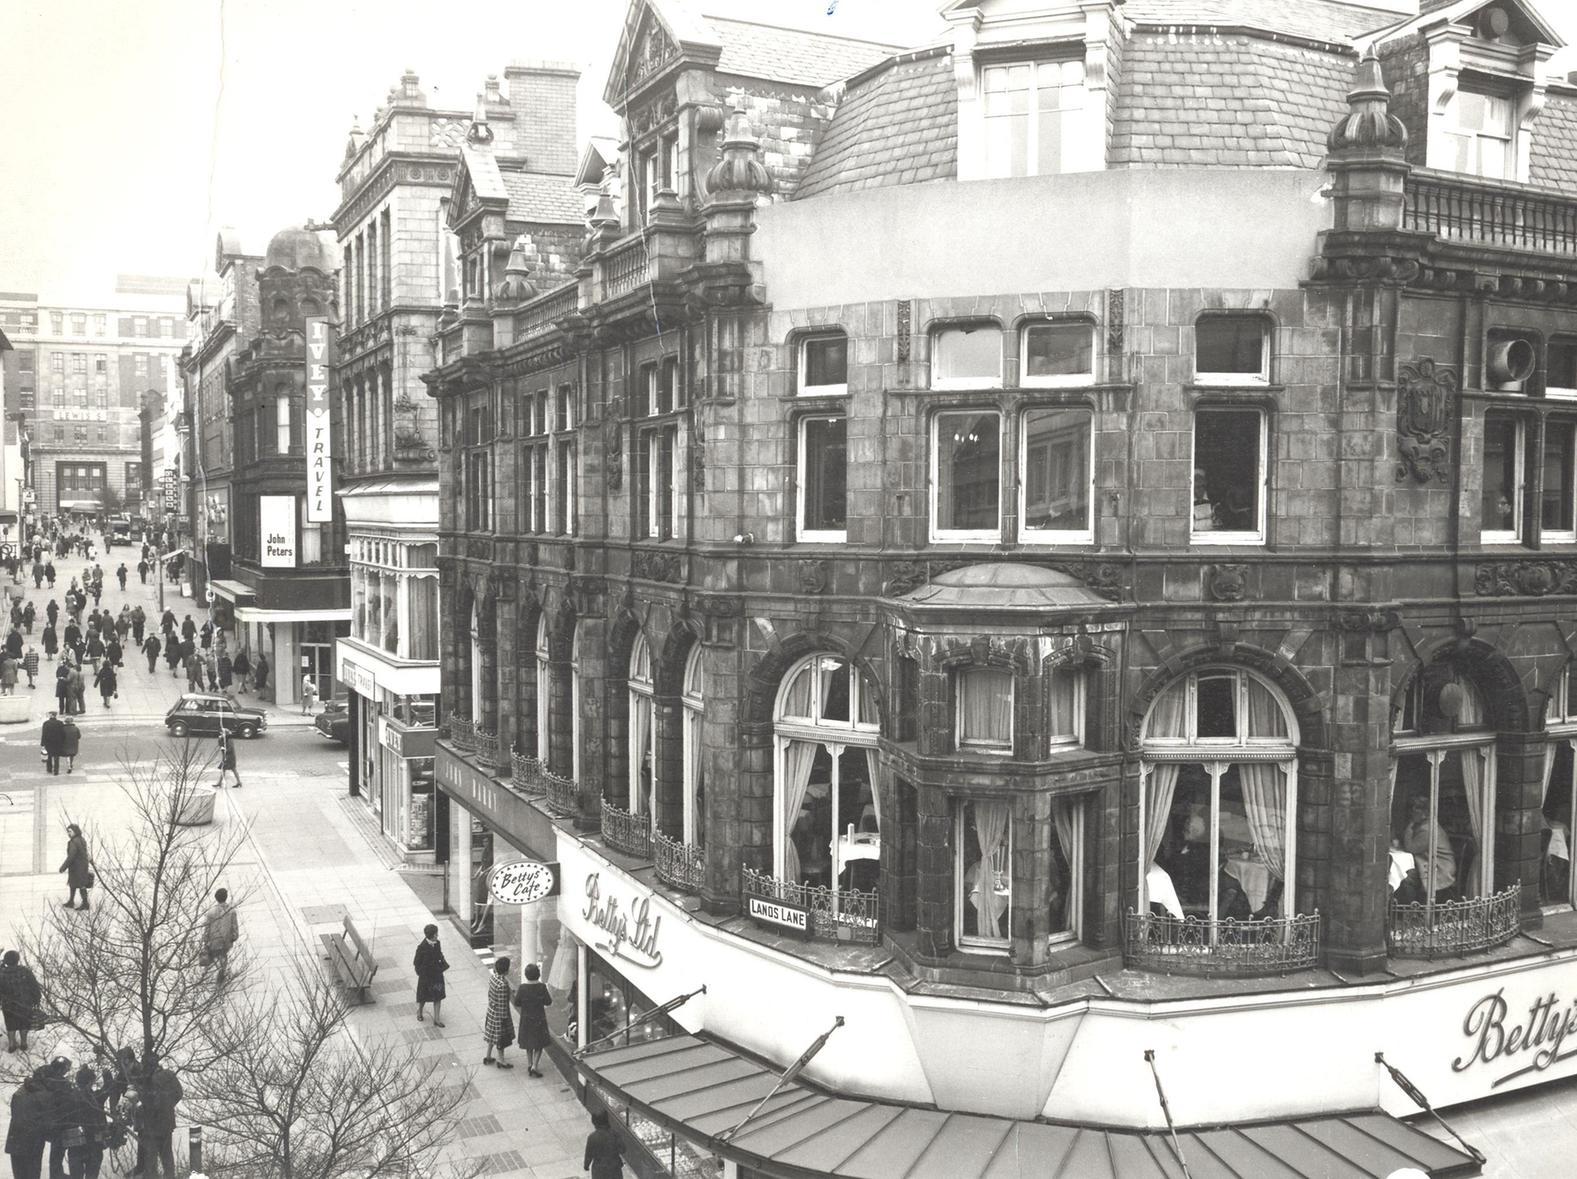 The price of operating in such large premises in the city centre had risen to such an extent that the cafe was no longer profitable.